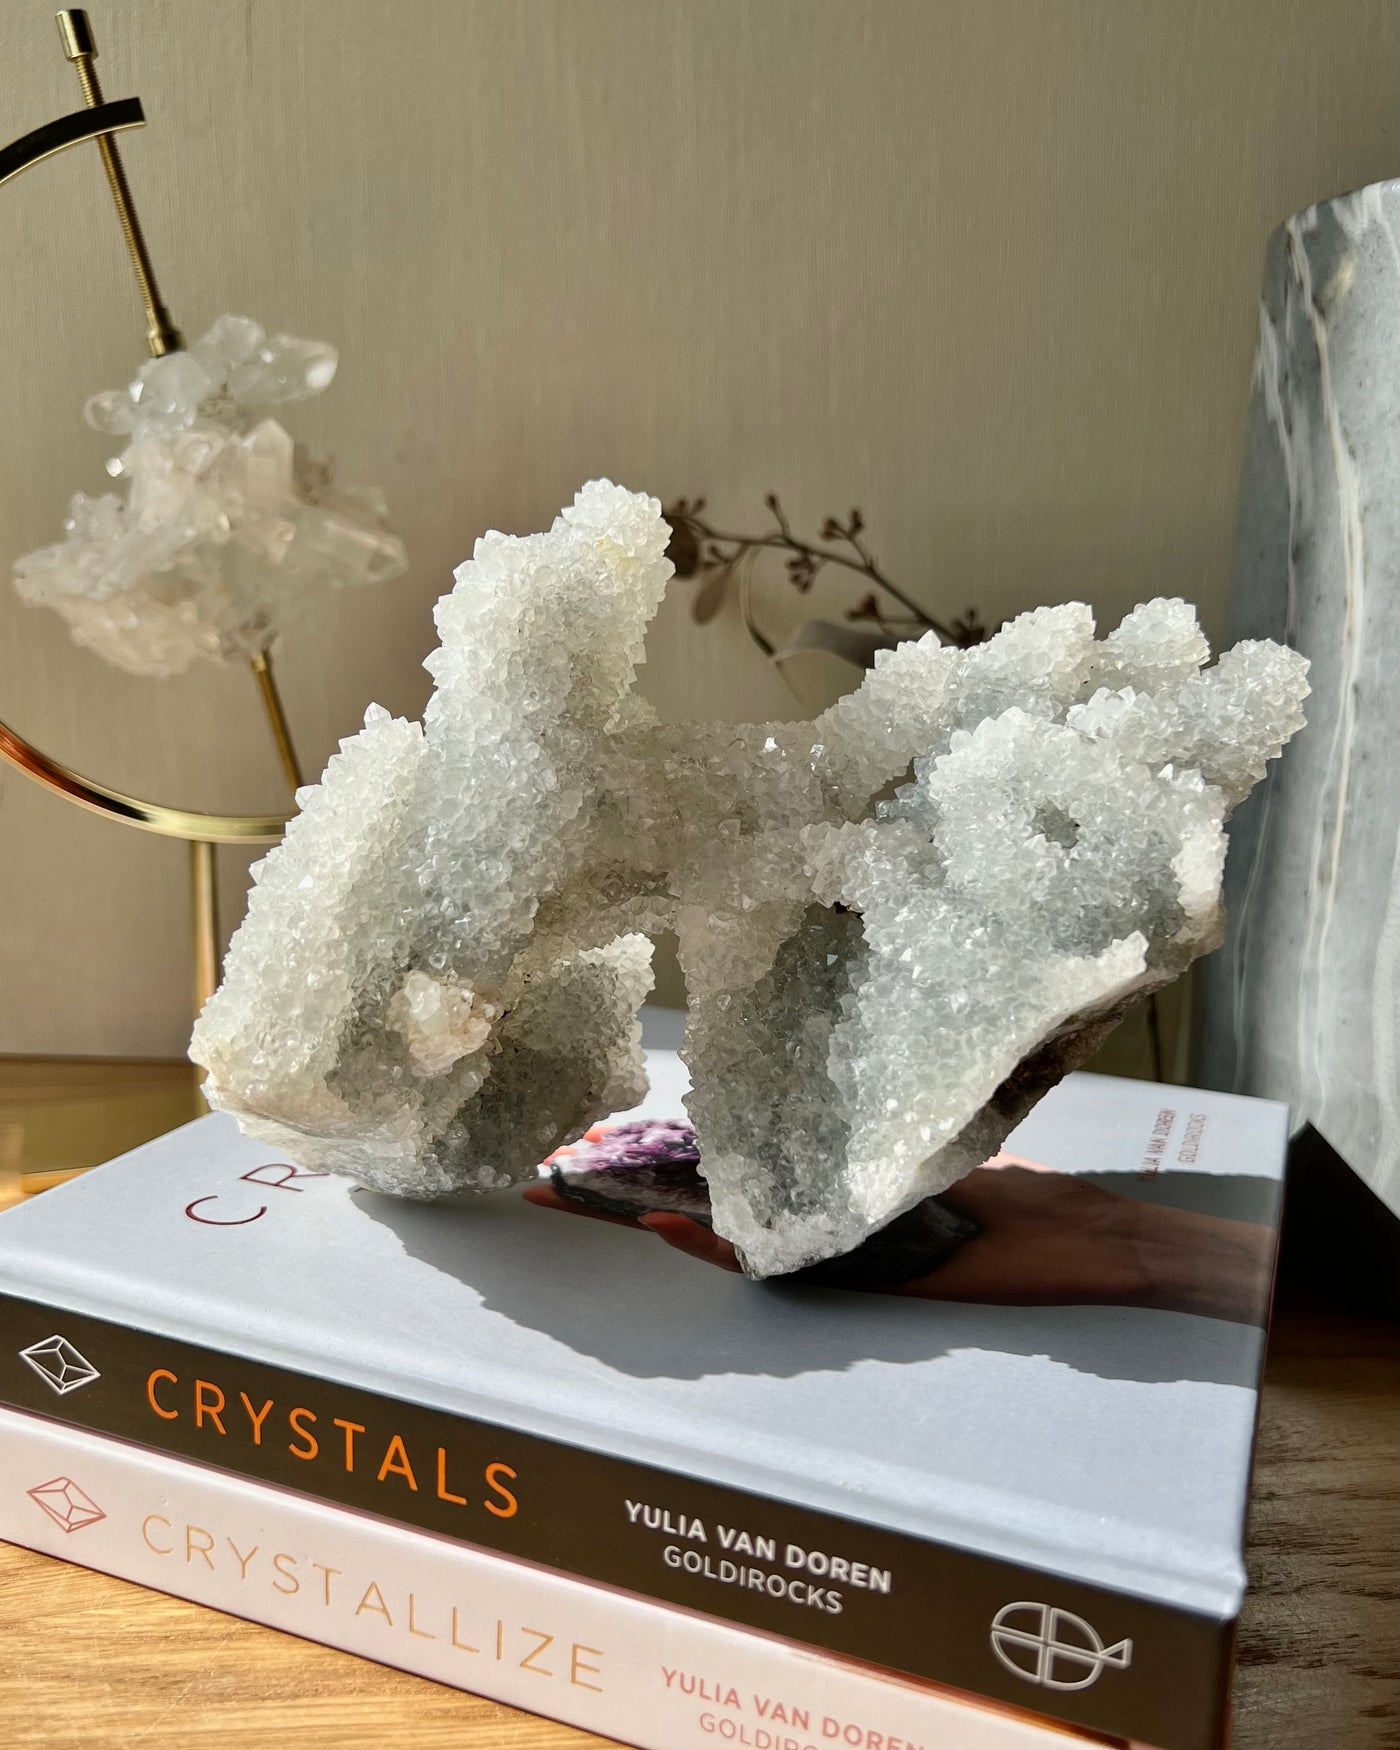 [Architect] Structural Apophyllite Chalcedony